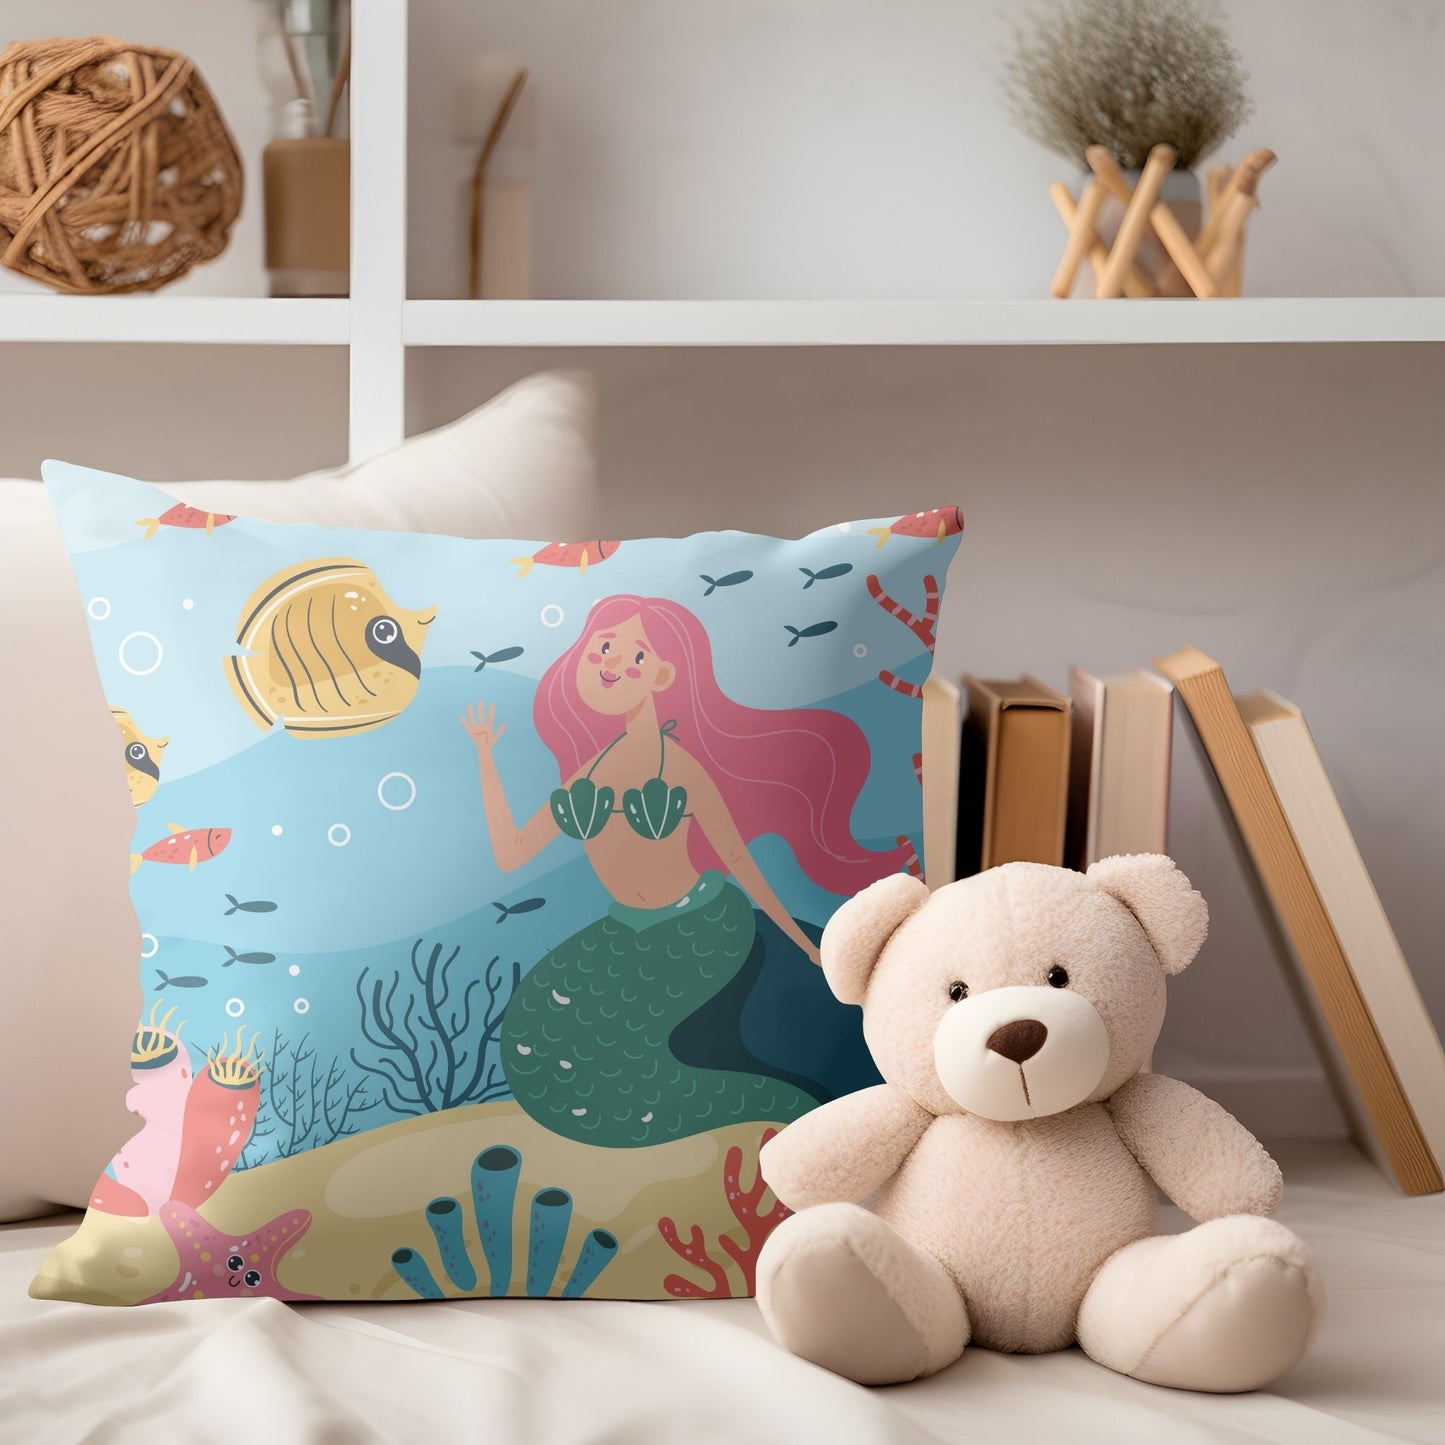 Whimsical mermaid-printed pillow to adorn girls' spaces.